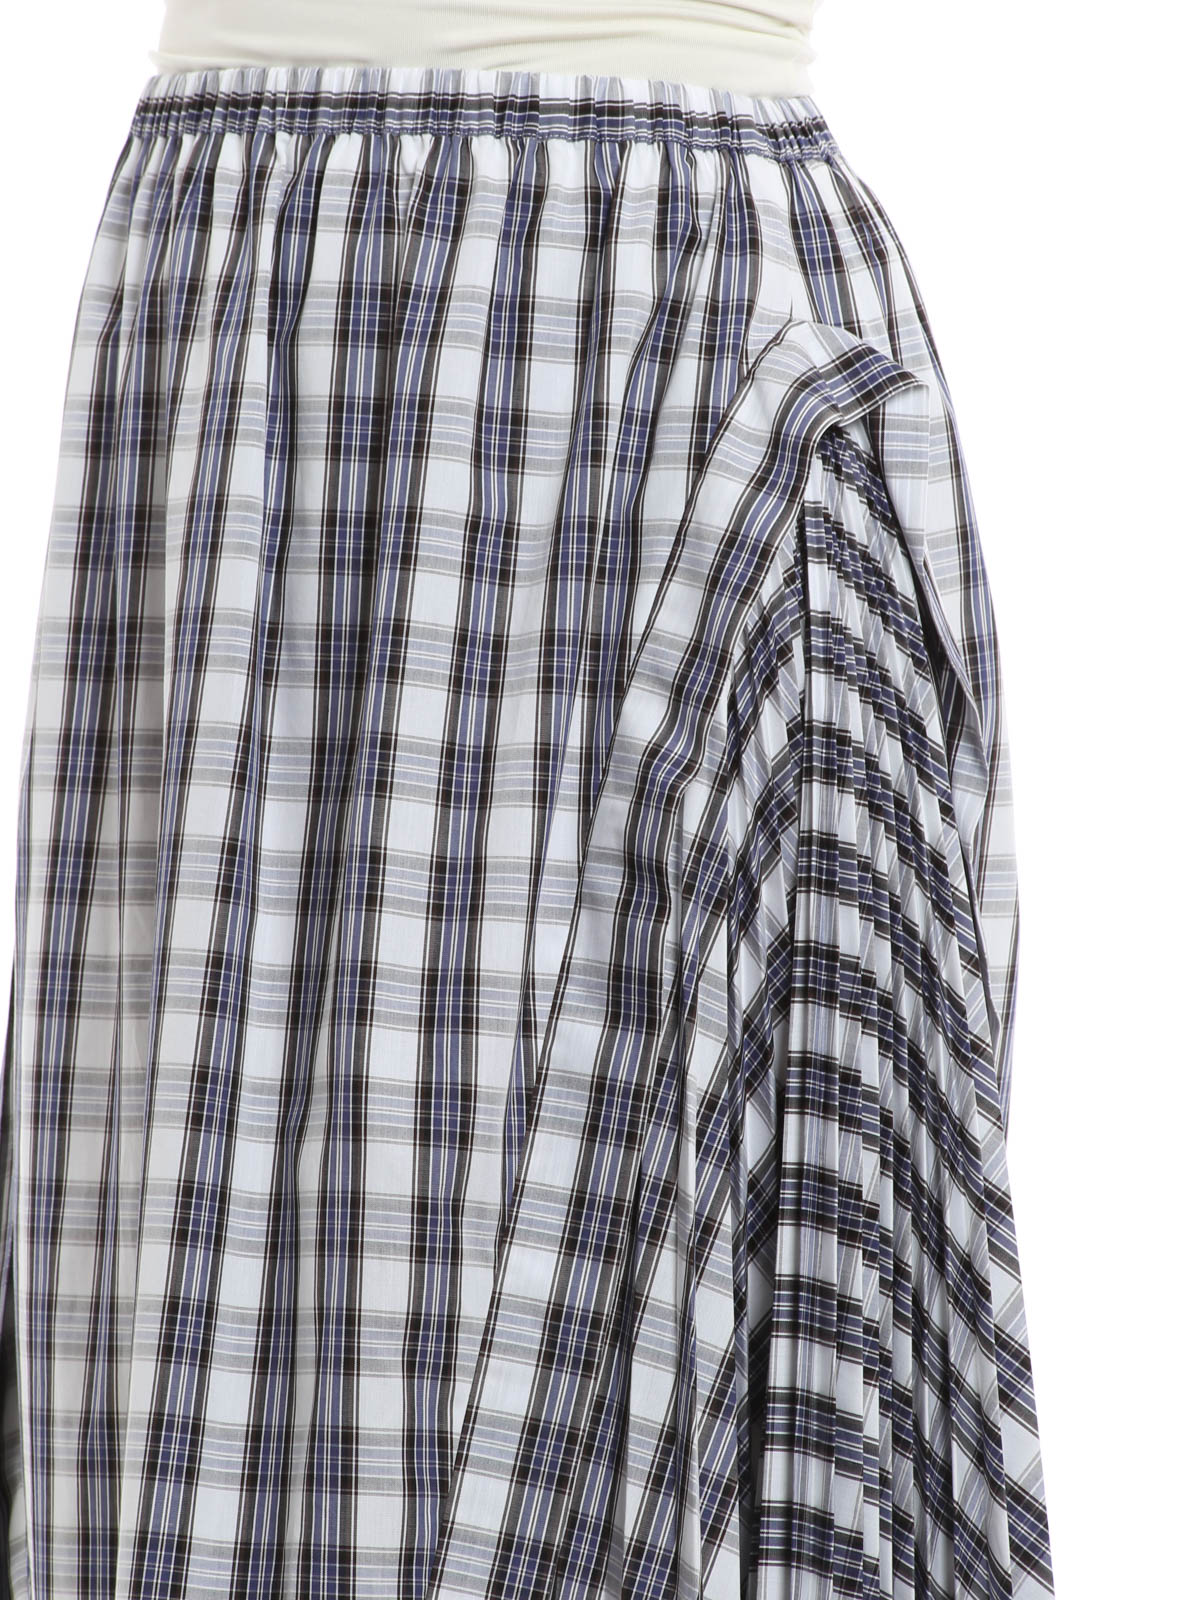 Checked Skirts  Buy Checked Skirts Online Starting at Just 175  Meesho